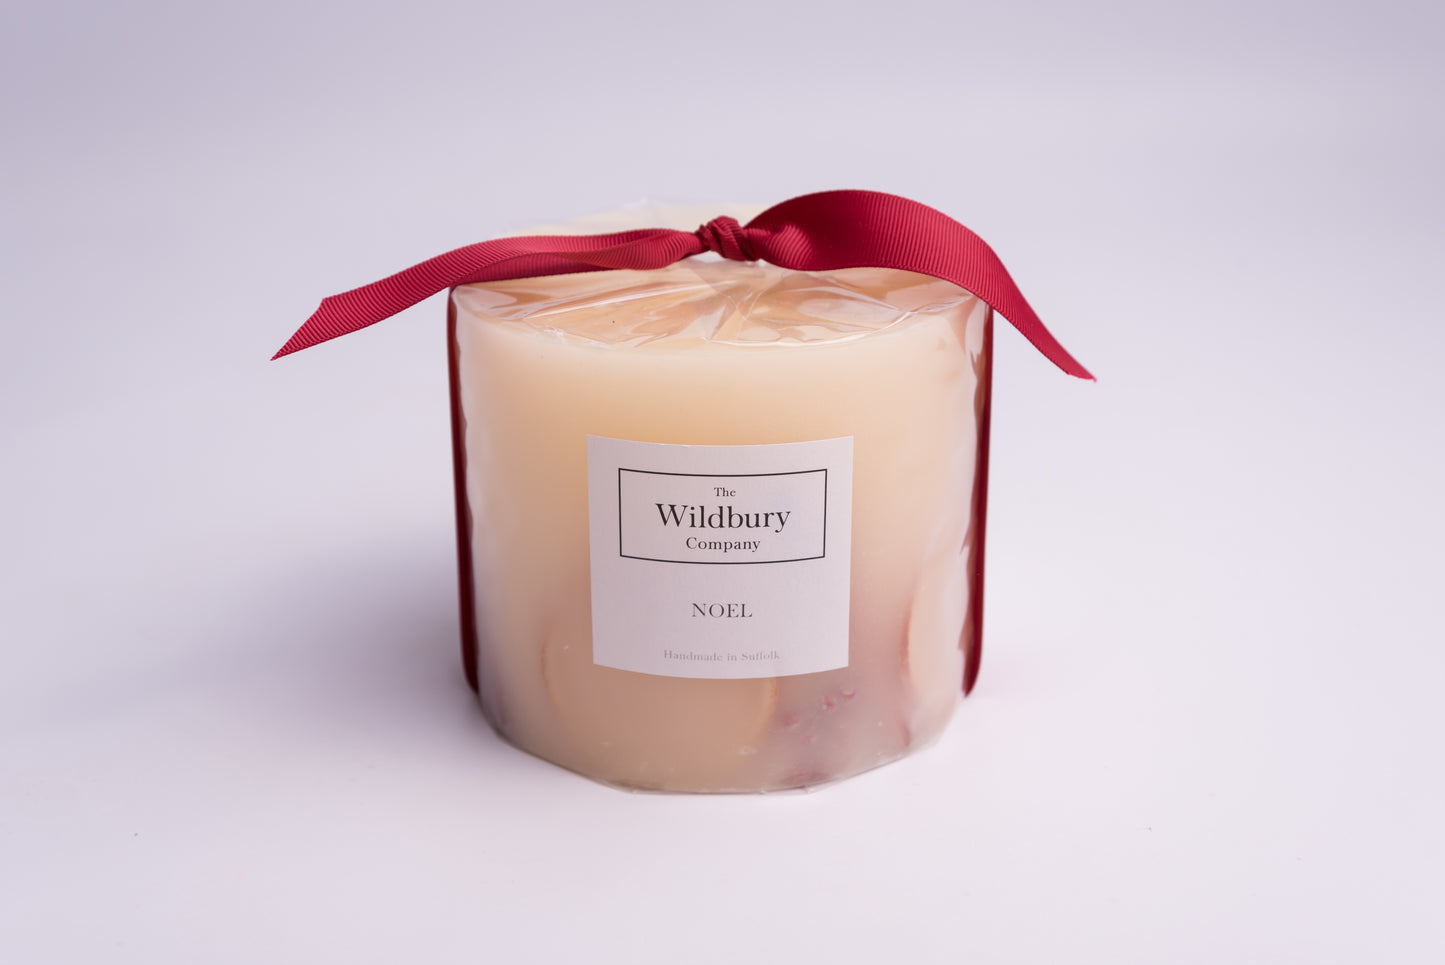 Large Three Wiick Botanical Candle with orange slices, cinnamon sticks, pepper berries and fir tips carefully suspended within the wax, tied with red ribbon.